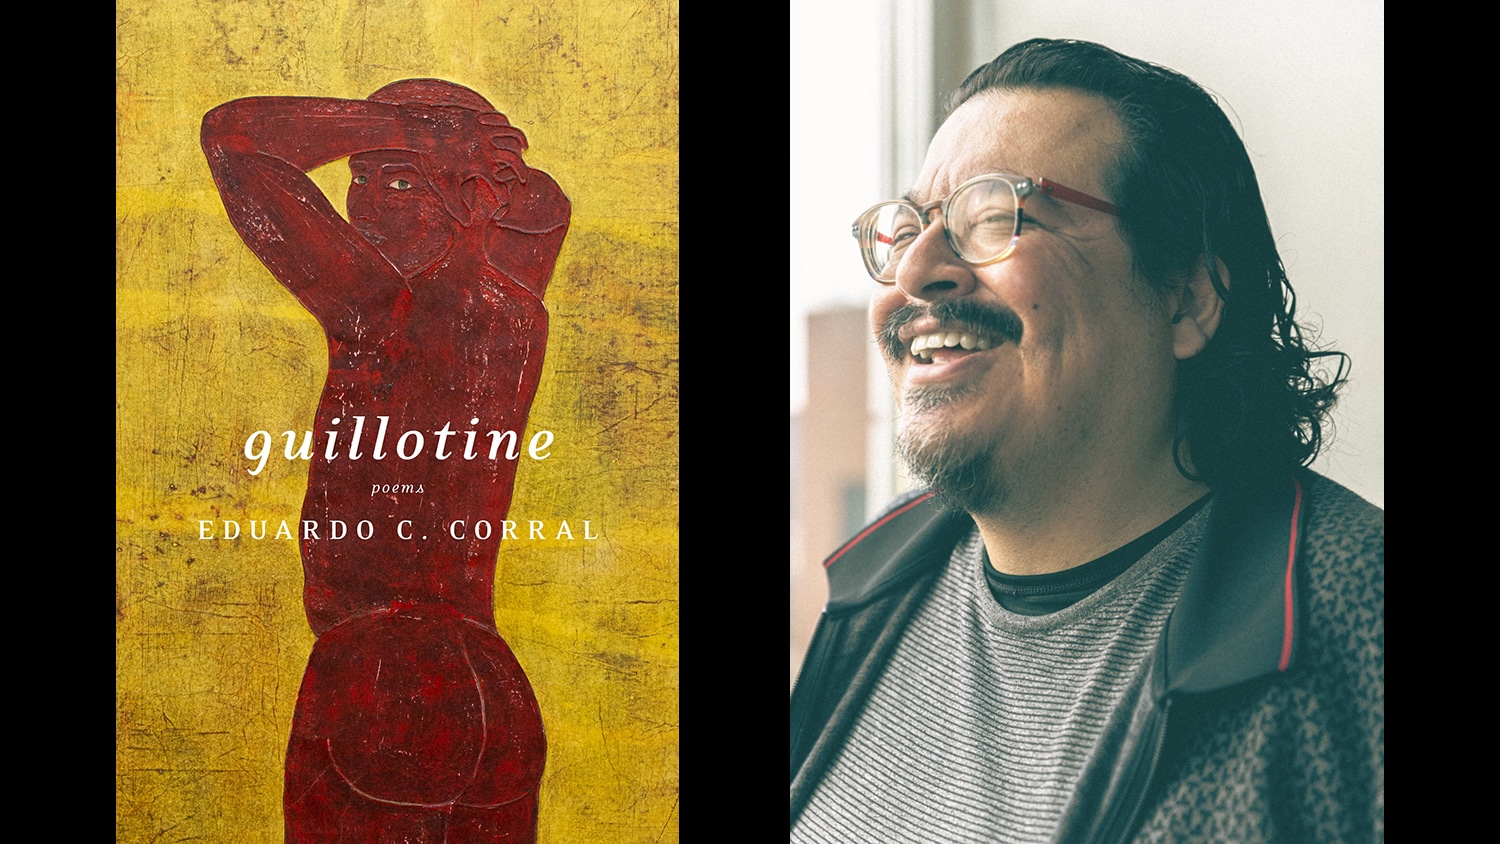 Eduardo C. Corral and the cover of his second book, guillotine, published by Graywolf Press. Photo by Nicholas Nichols.